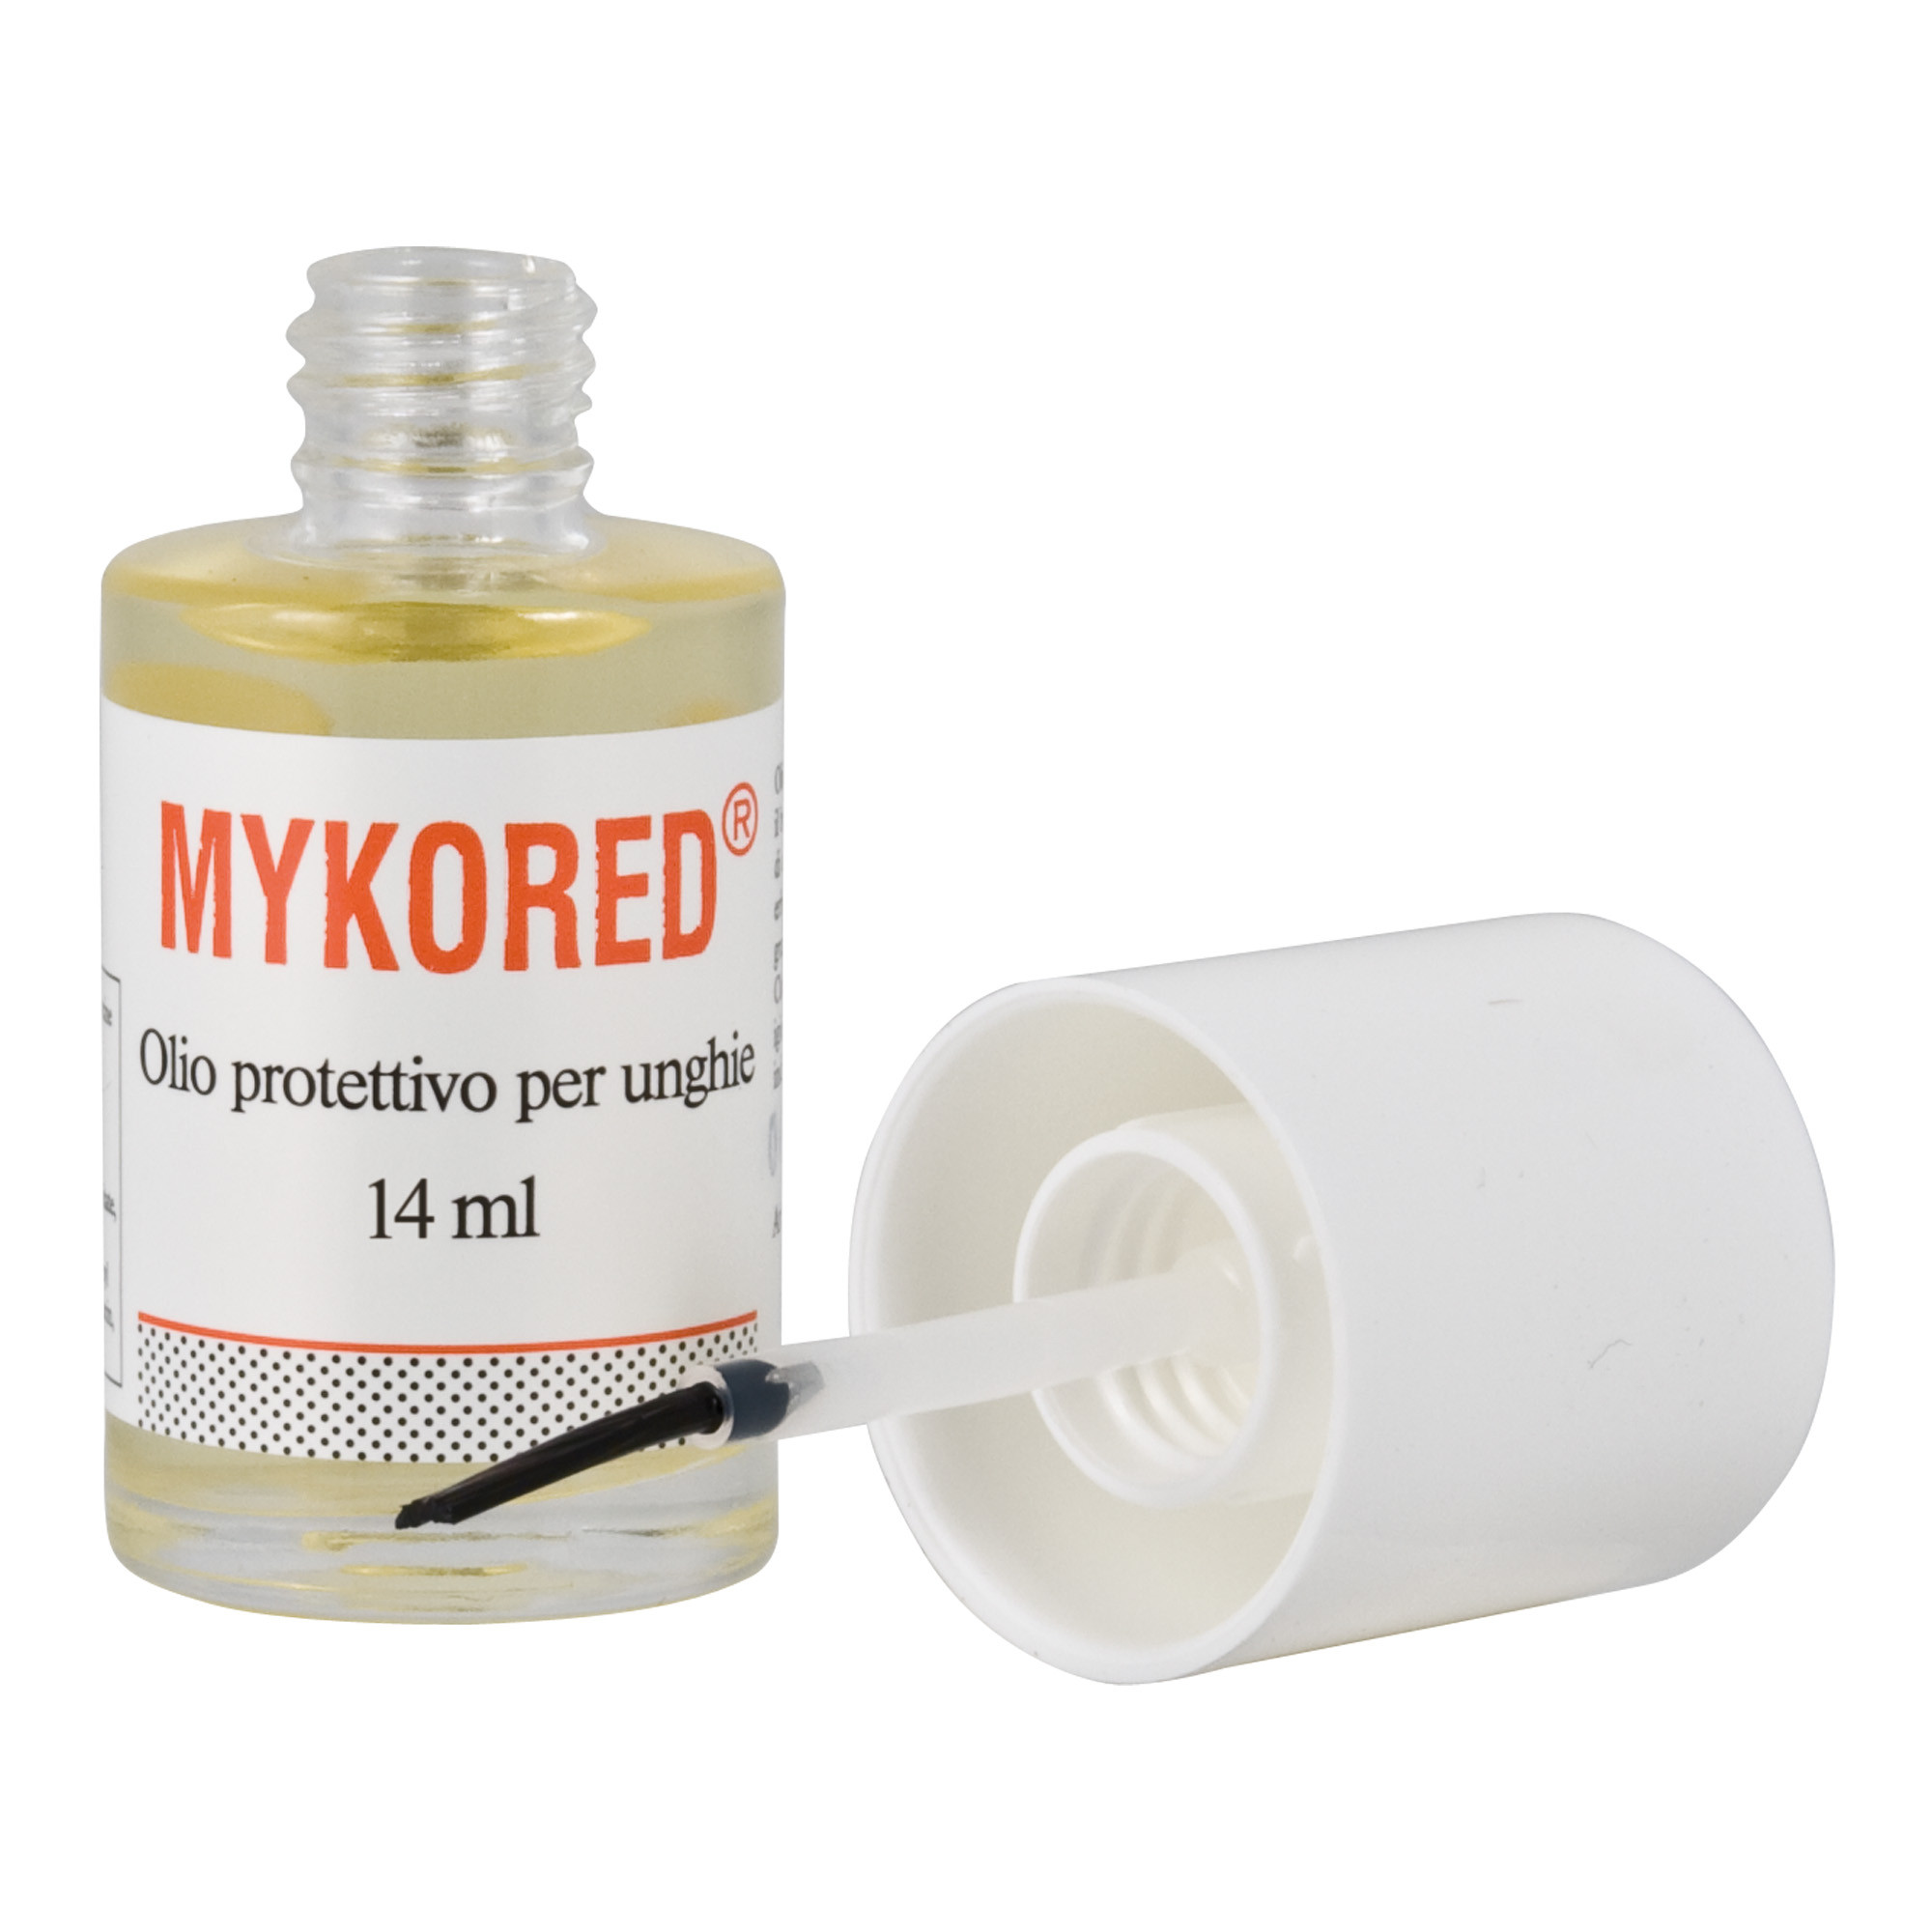 Mykored protective nail oil 14 ml